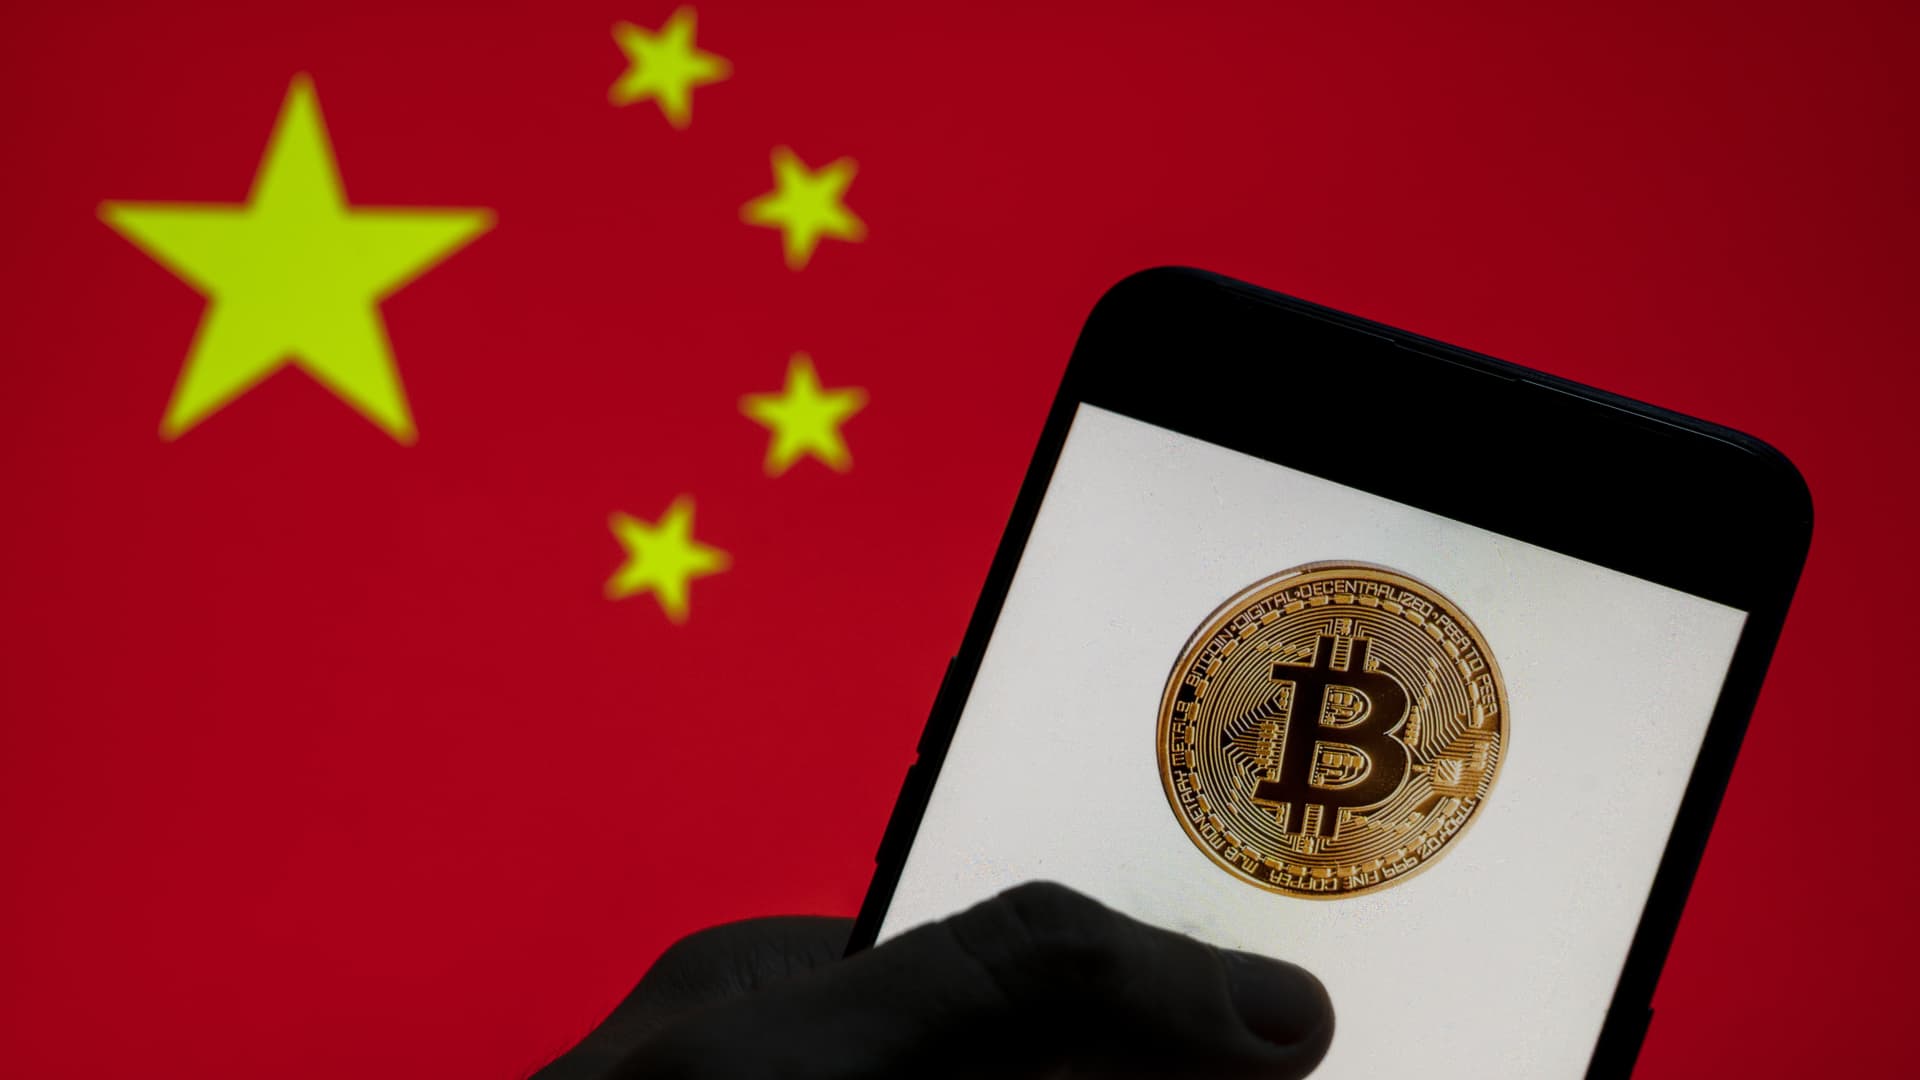 In this photo illustration, the Bitcoin logo is seen on a mobile device with People's Republic of China flag in the background. (Photo Illustration by t/SOPA Images/LightRocket via Getty Images)